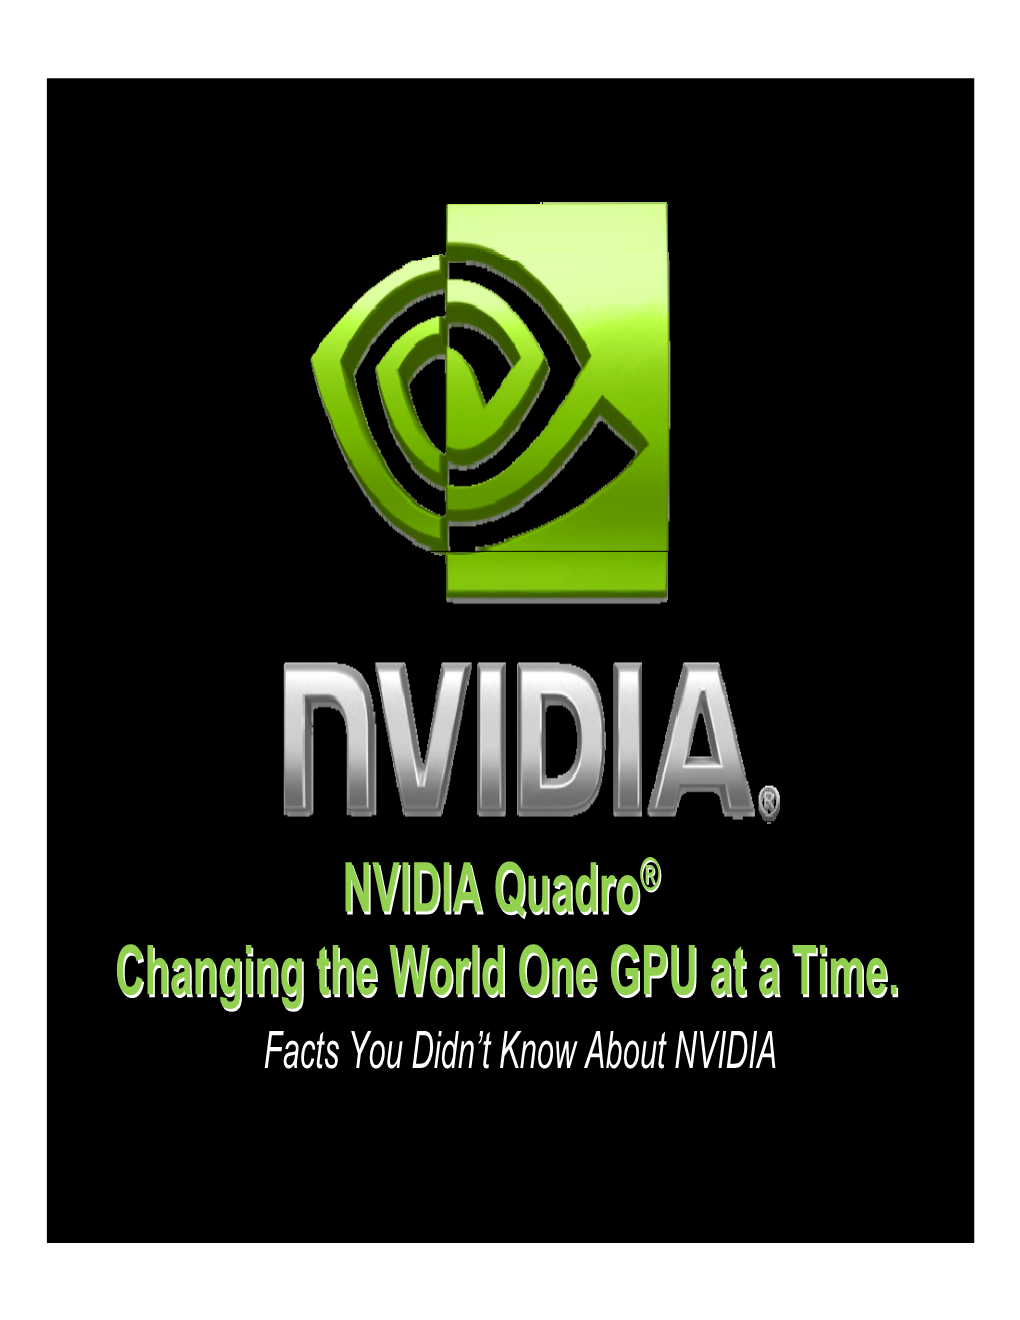 NVIDIA Quadro® Changing the World One GPU at a Time